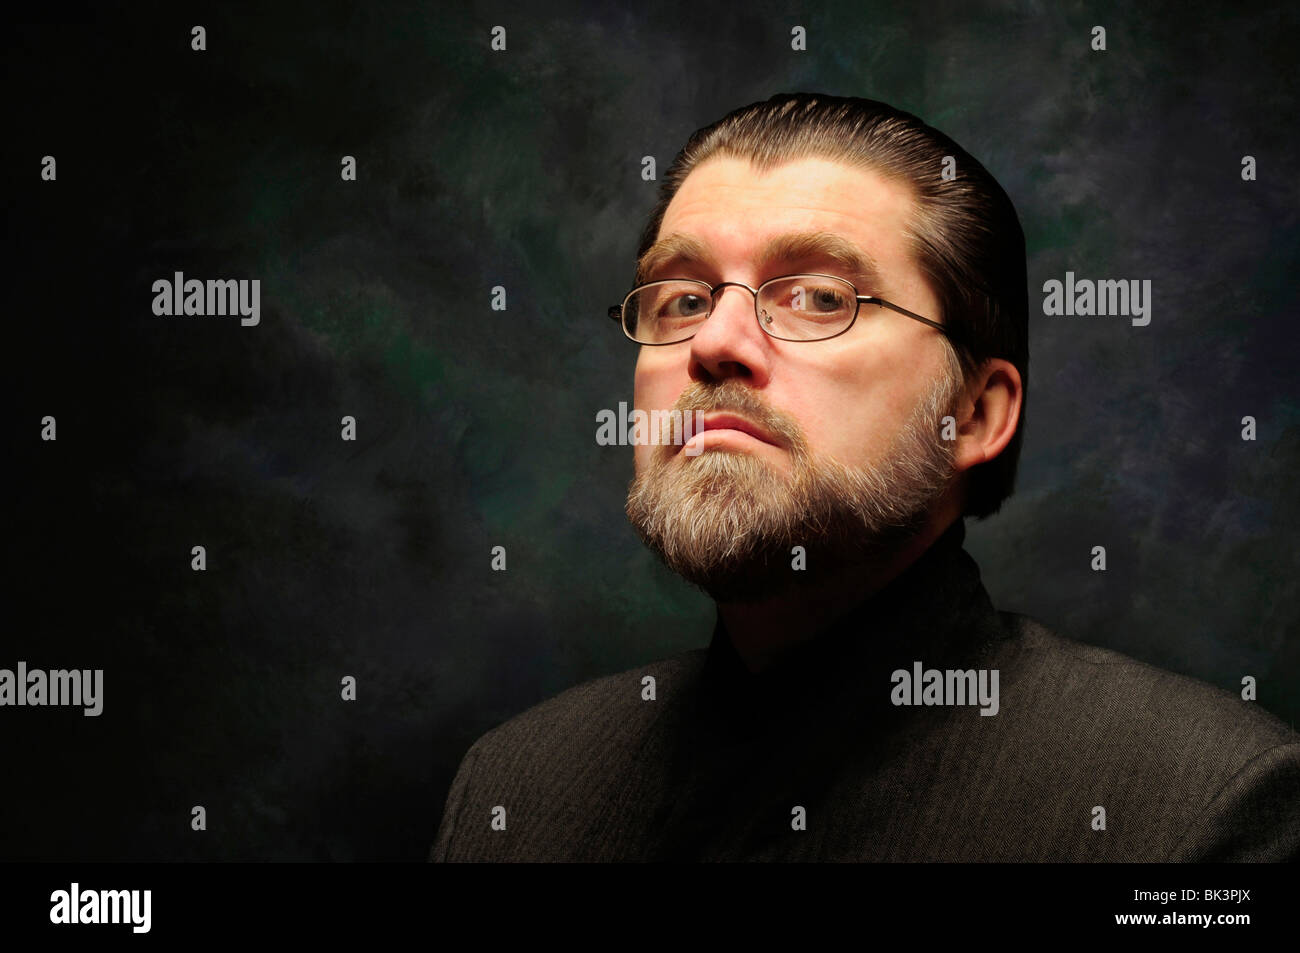 Orwellian character with glasses and beard against a dark background Stock Photo